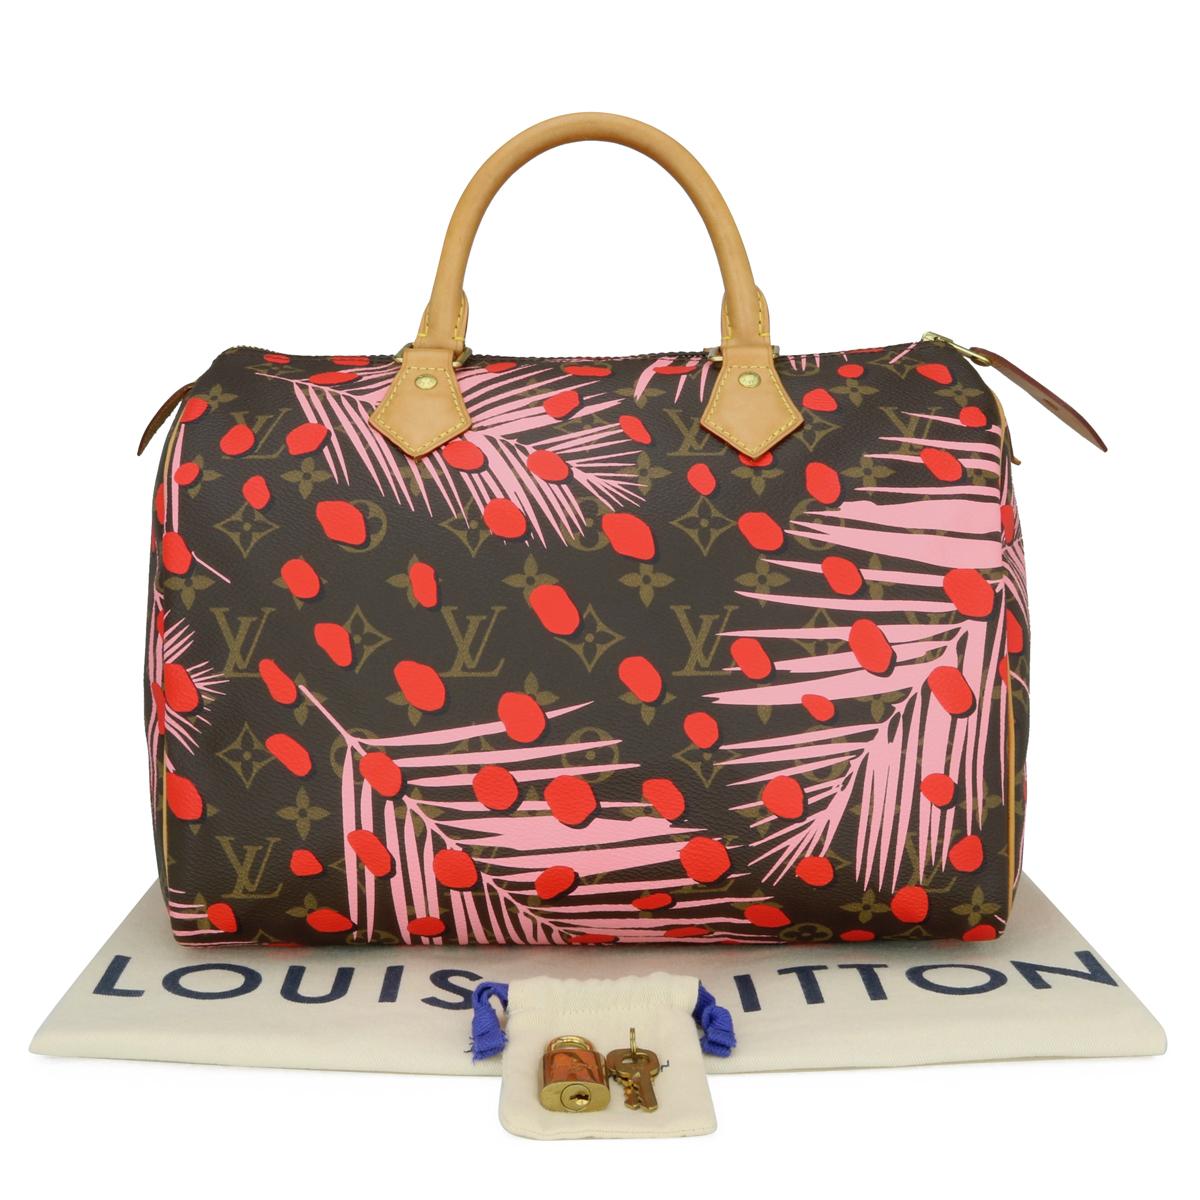 Louis Vuitton Speedy 30 Bag in Jungle Dots Monogram with Gold Hardware 2016 Limited Edition.

This bag is in very good condition.

This is truly a gorgeous bag made only from the Palm Springs Collection. It is one of the most sought-after prints and